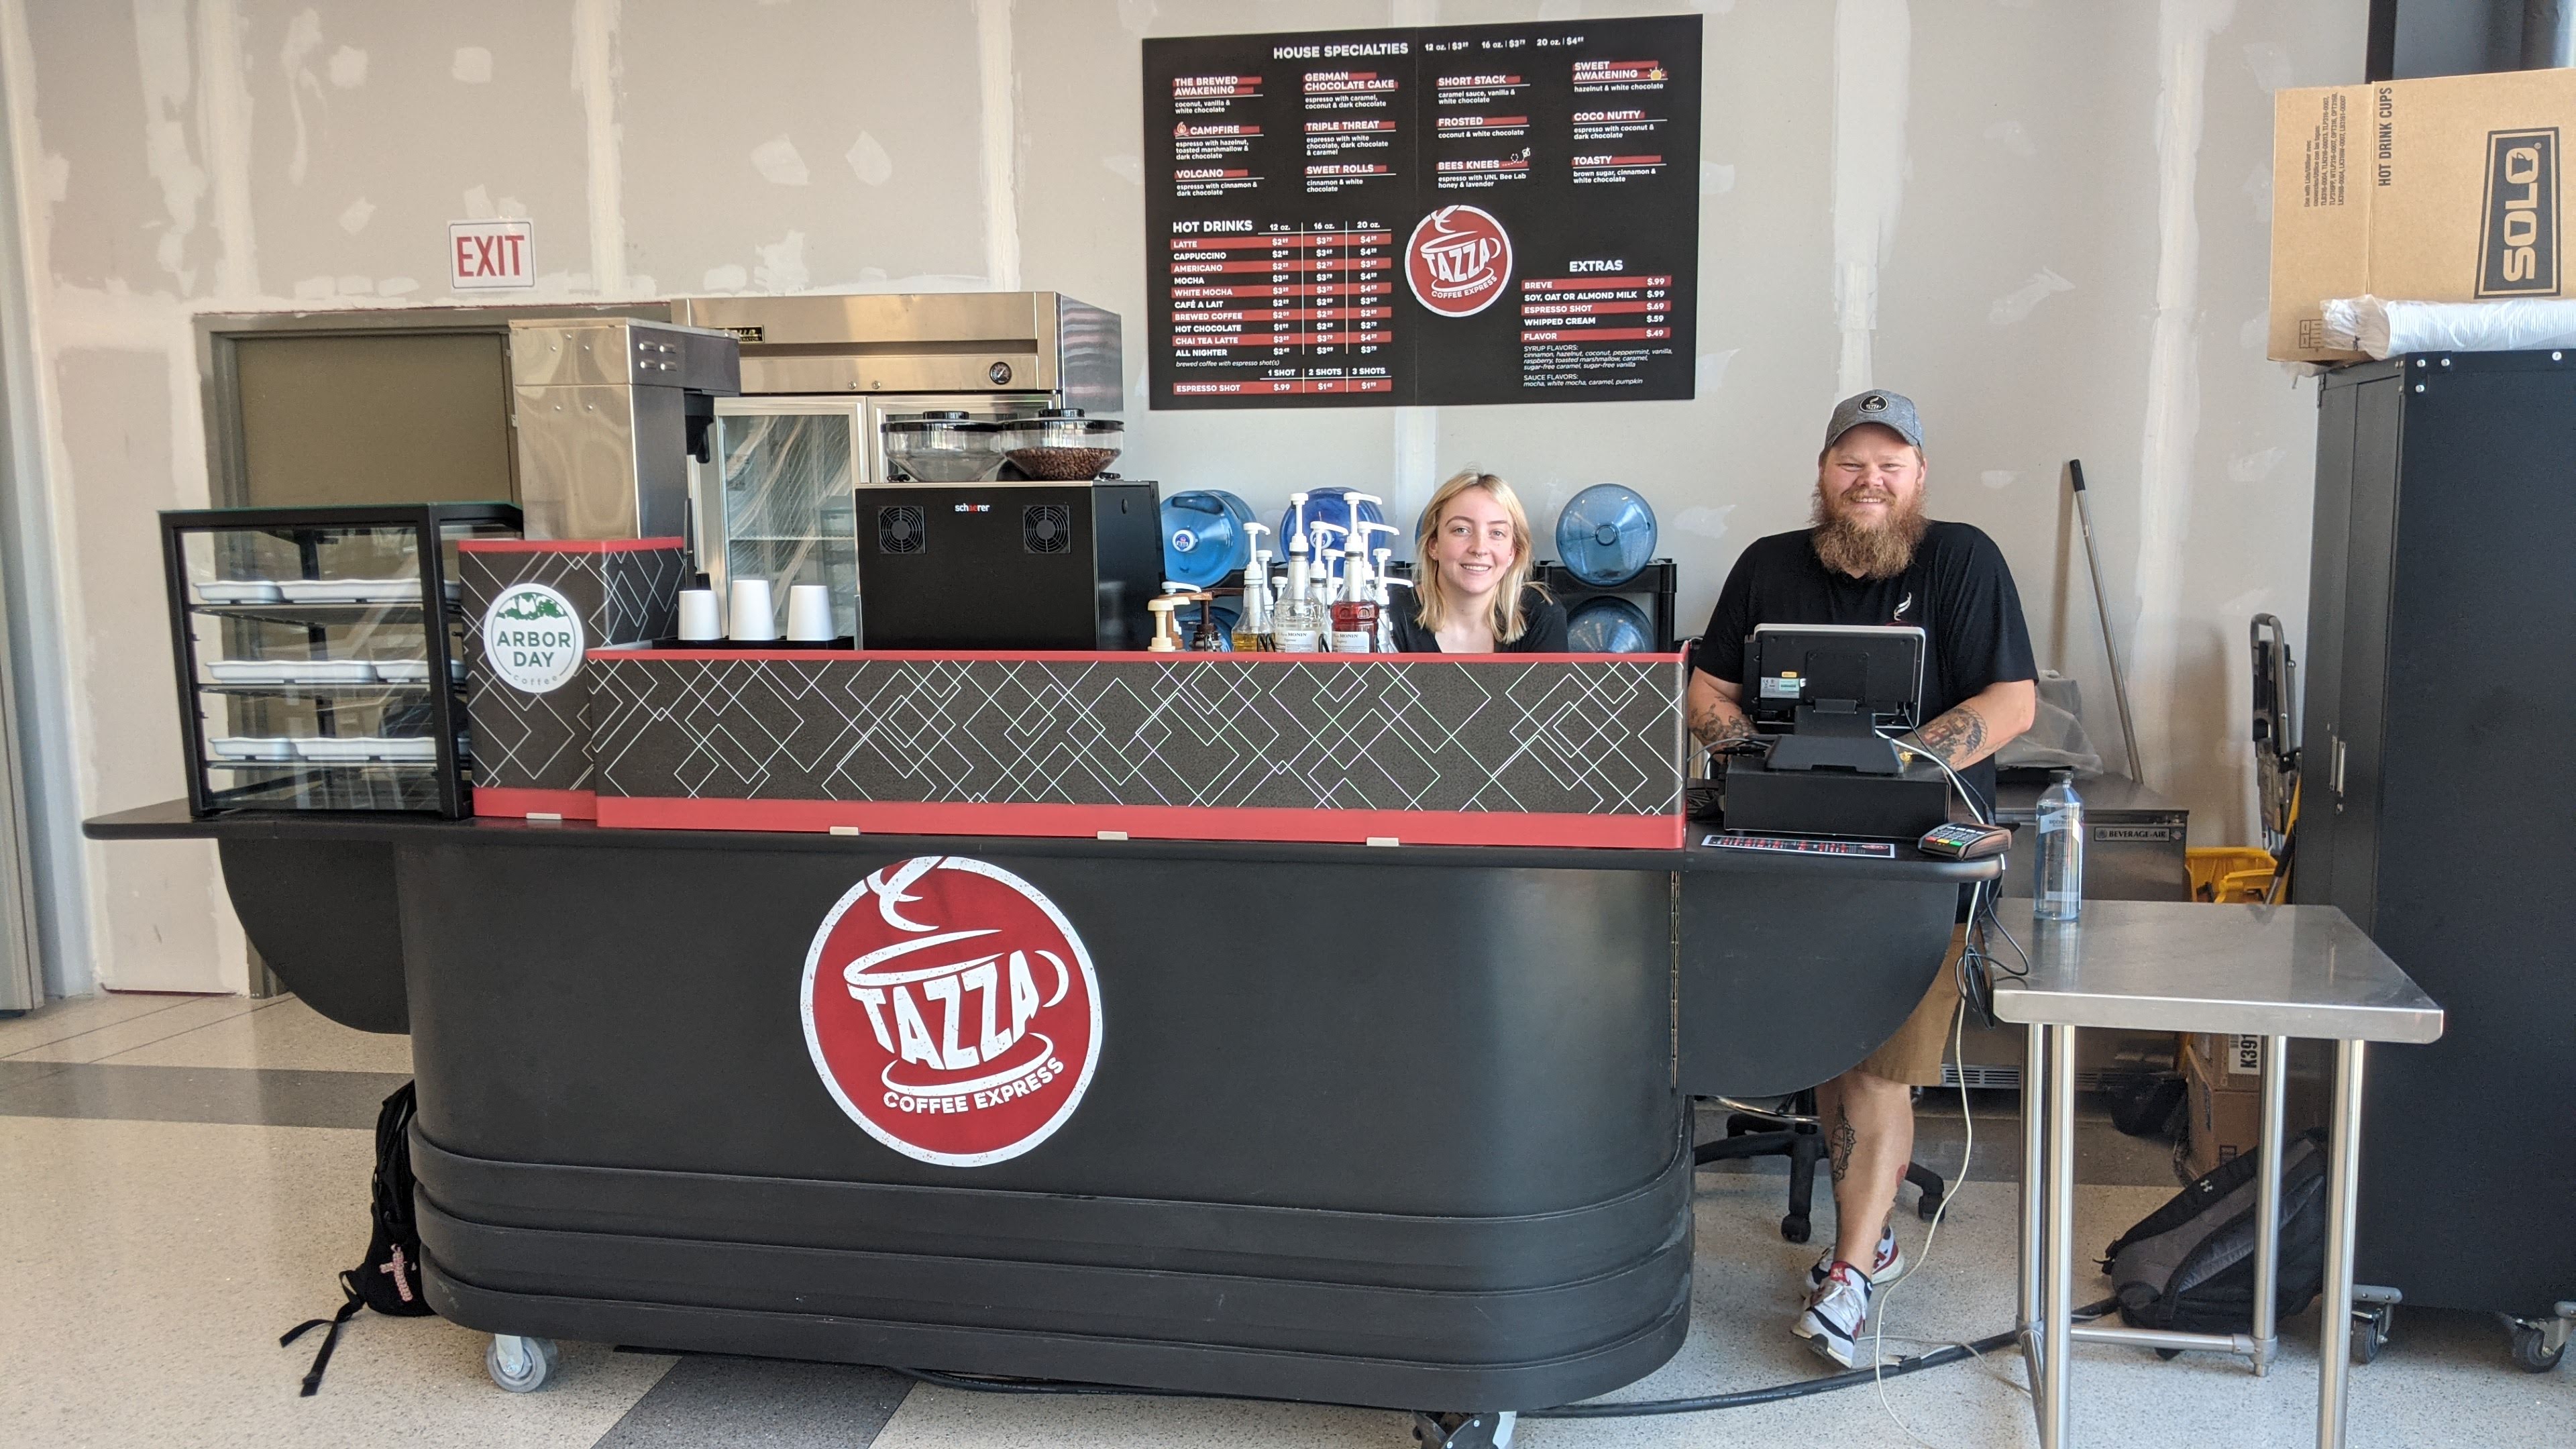 The Tazza Coffee Express on first floor of the Engineering Research Center is open Monday through Friday from 8 a.m. to 1 p.m.